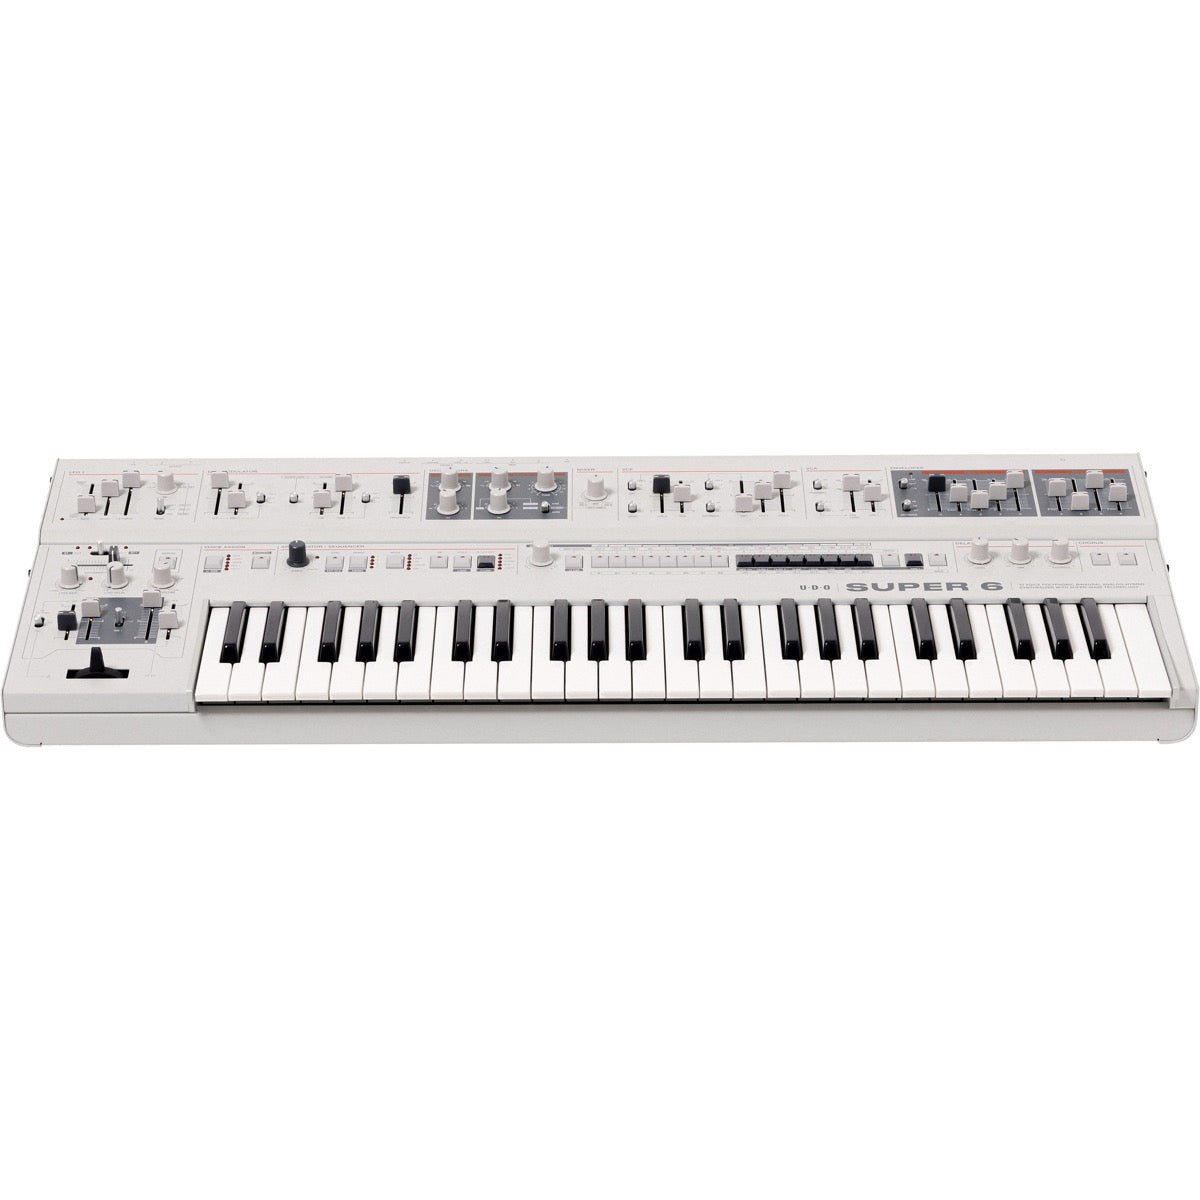 UDO Audio Super 6 12-Voice Polyphonic Keyboard Synthesizer - White View 2